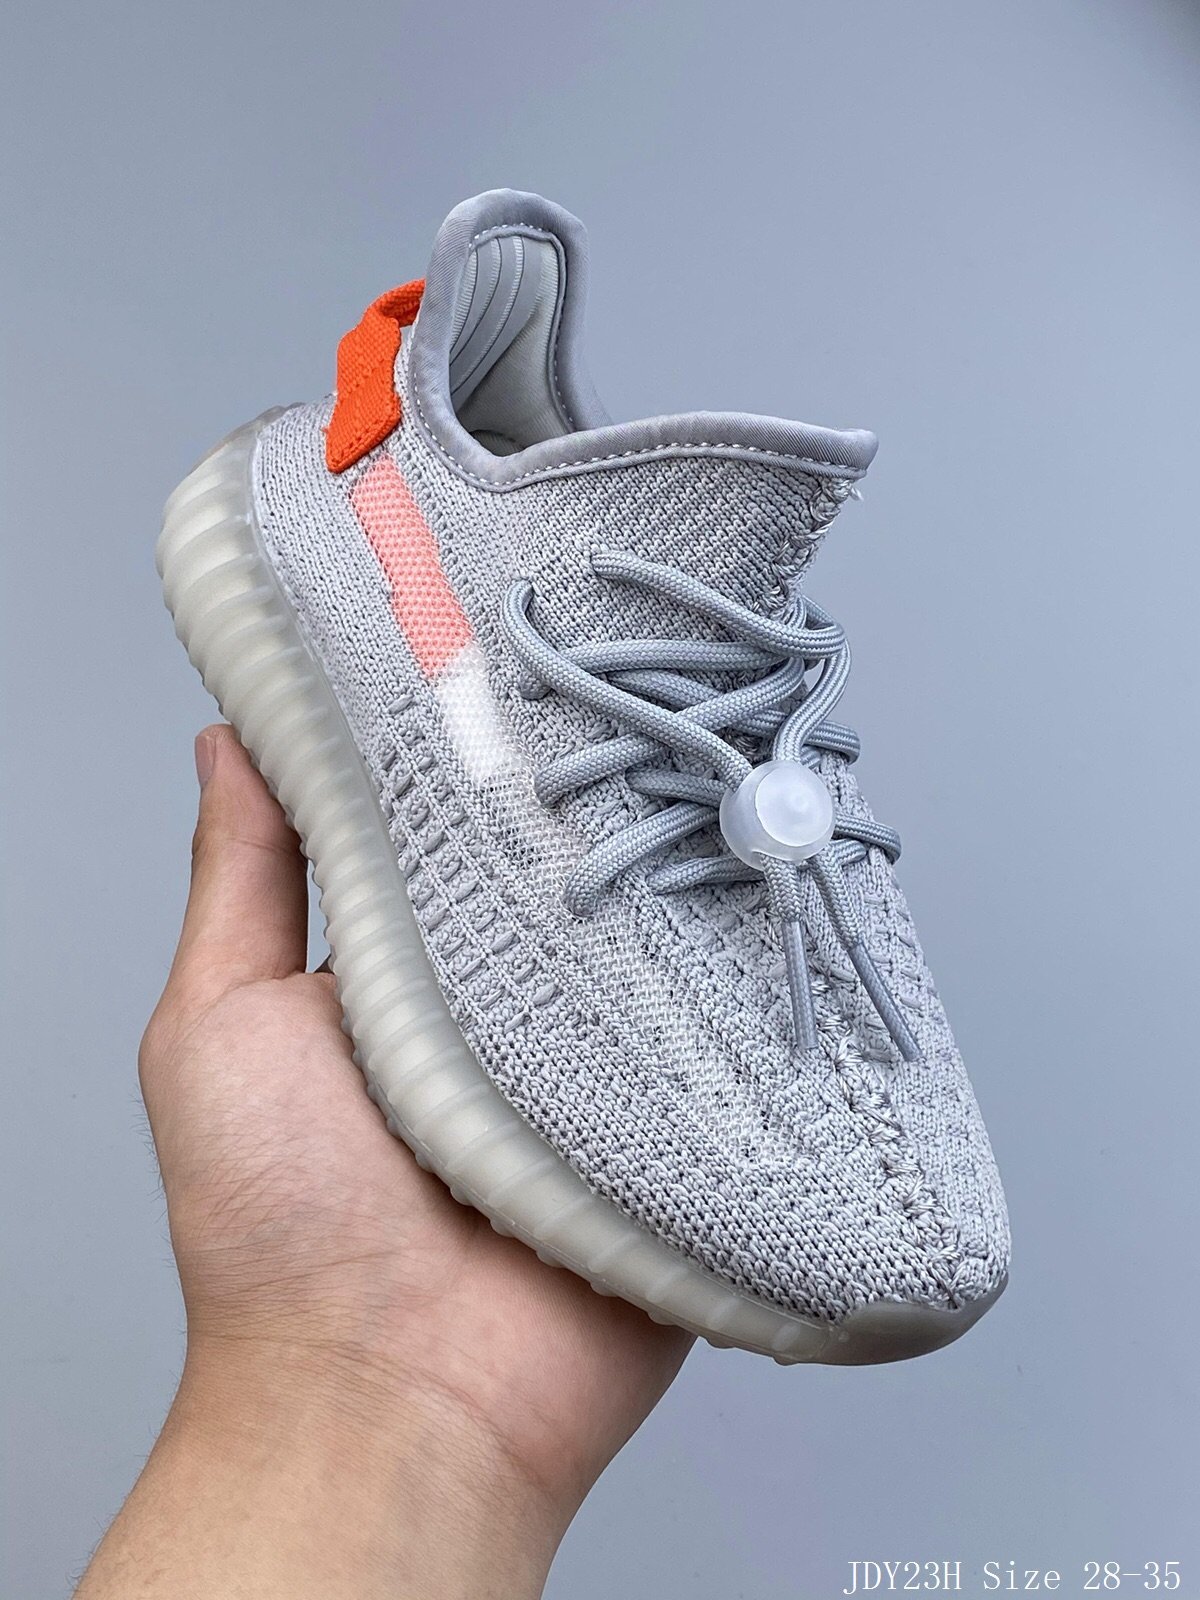 Adidas Yeezy Boost 350 Shoes For Kids # 269986, cheap Shoes for Kids Adidas Shoes For Kid, only $56!